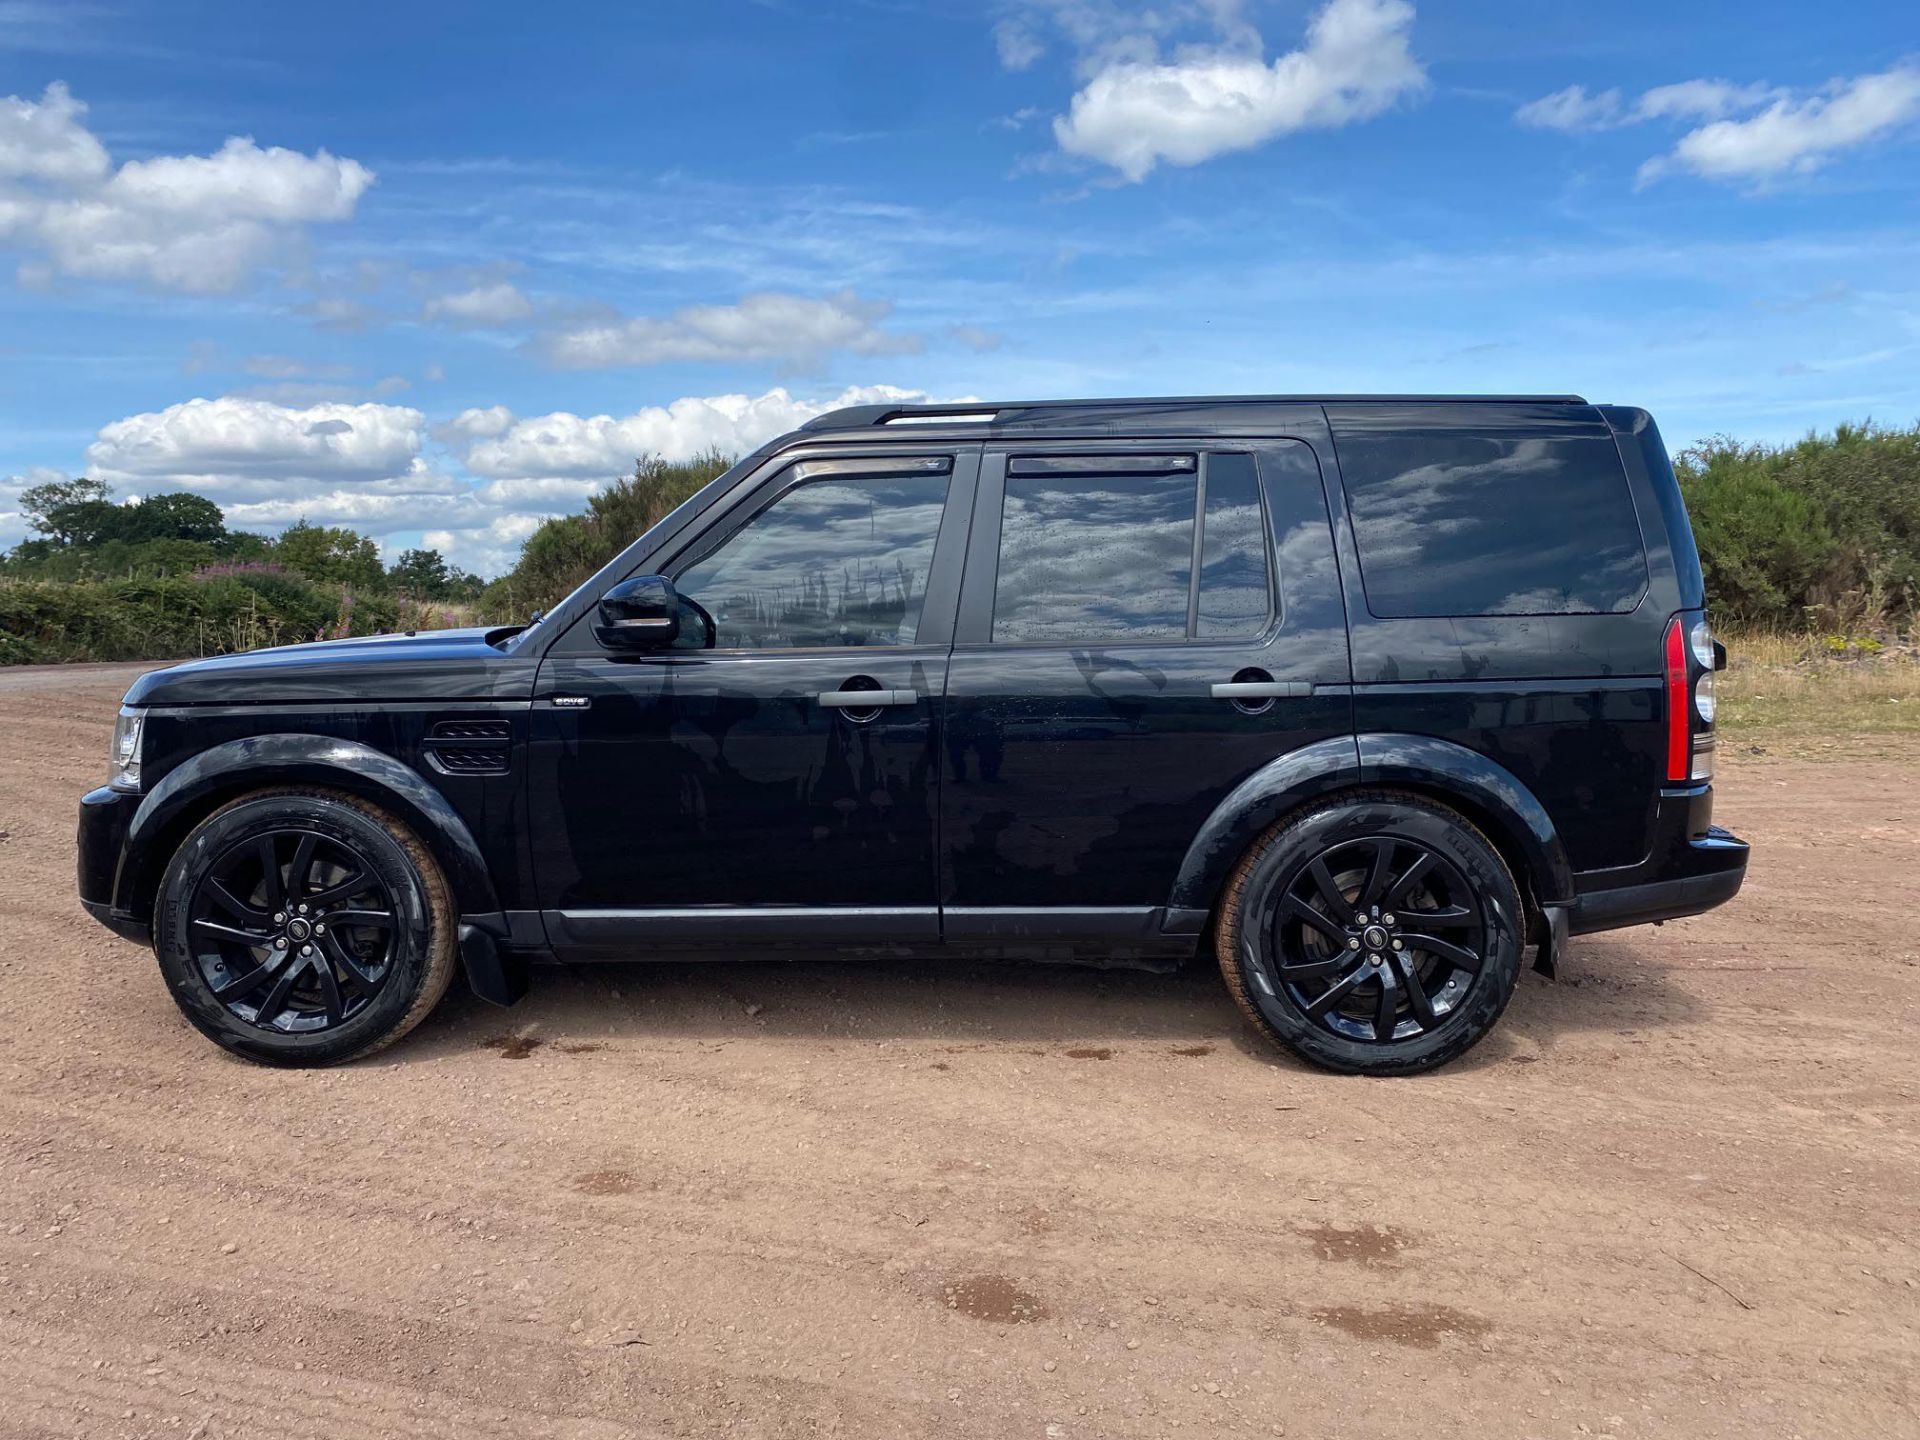 2015 LAND ROVER DISCOVERY XS SDV6 AUTO BLACK CONVERTED COMMERCIAL – WITH REAR SEAT CONVERSION - Image 6 of 16